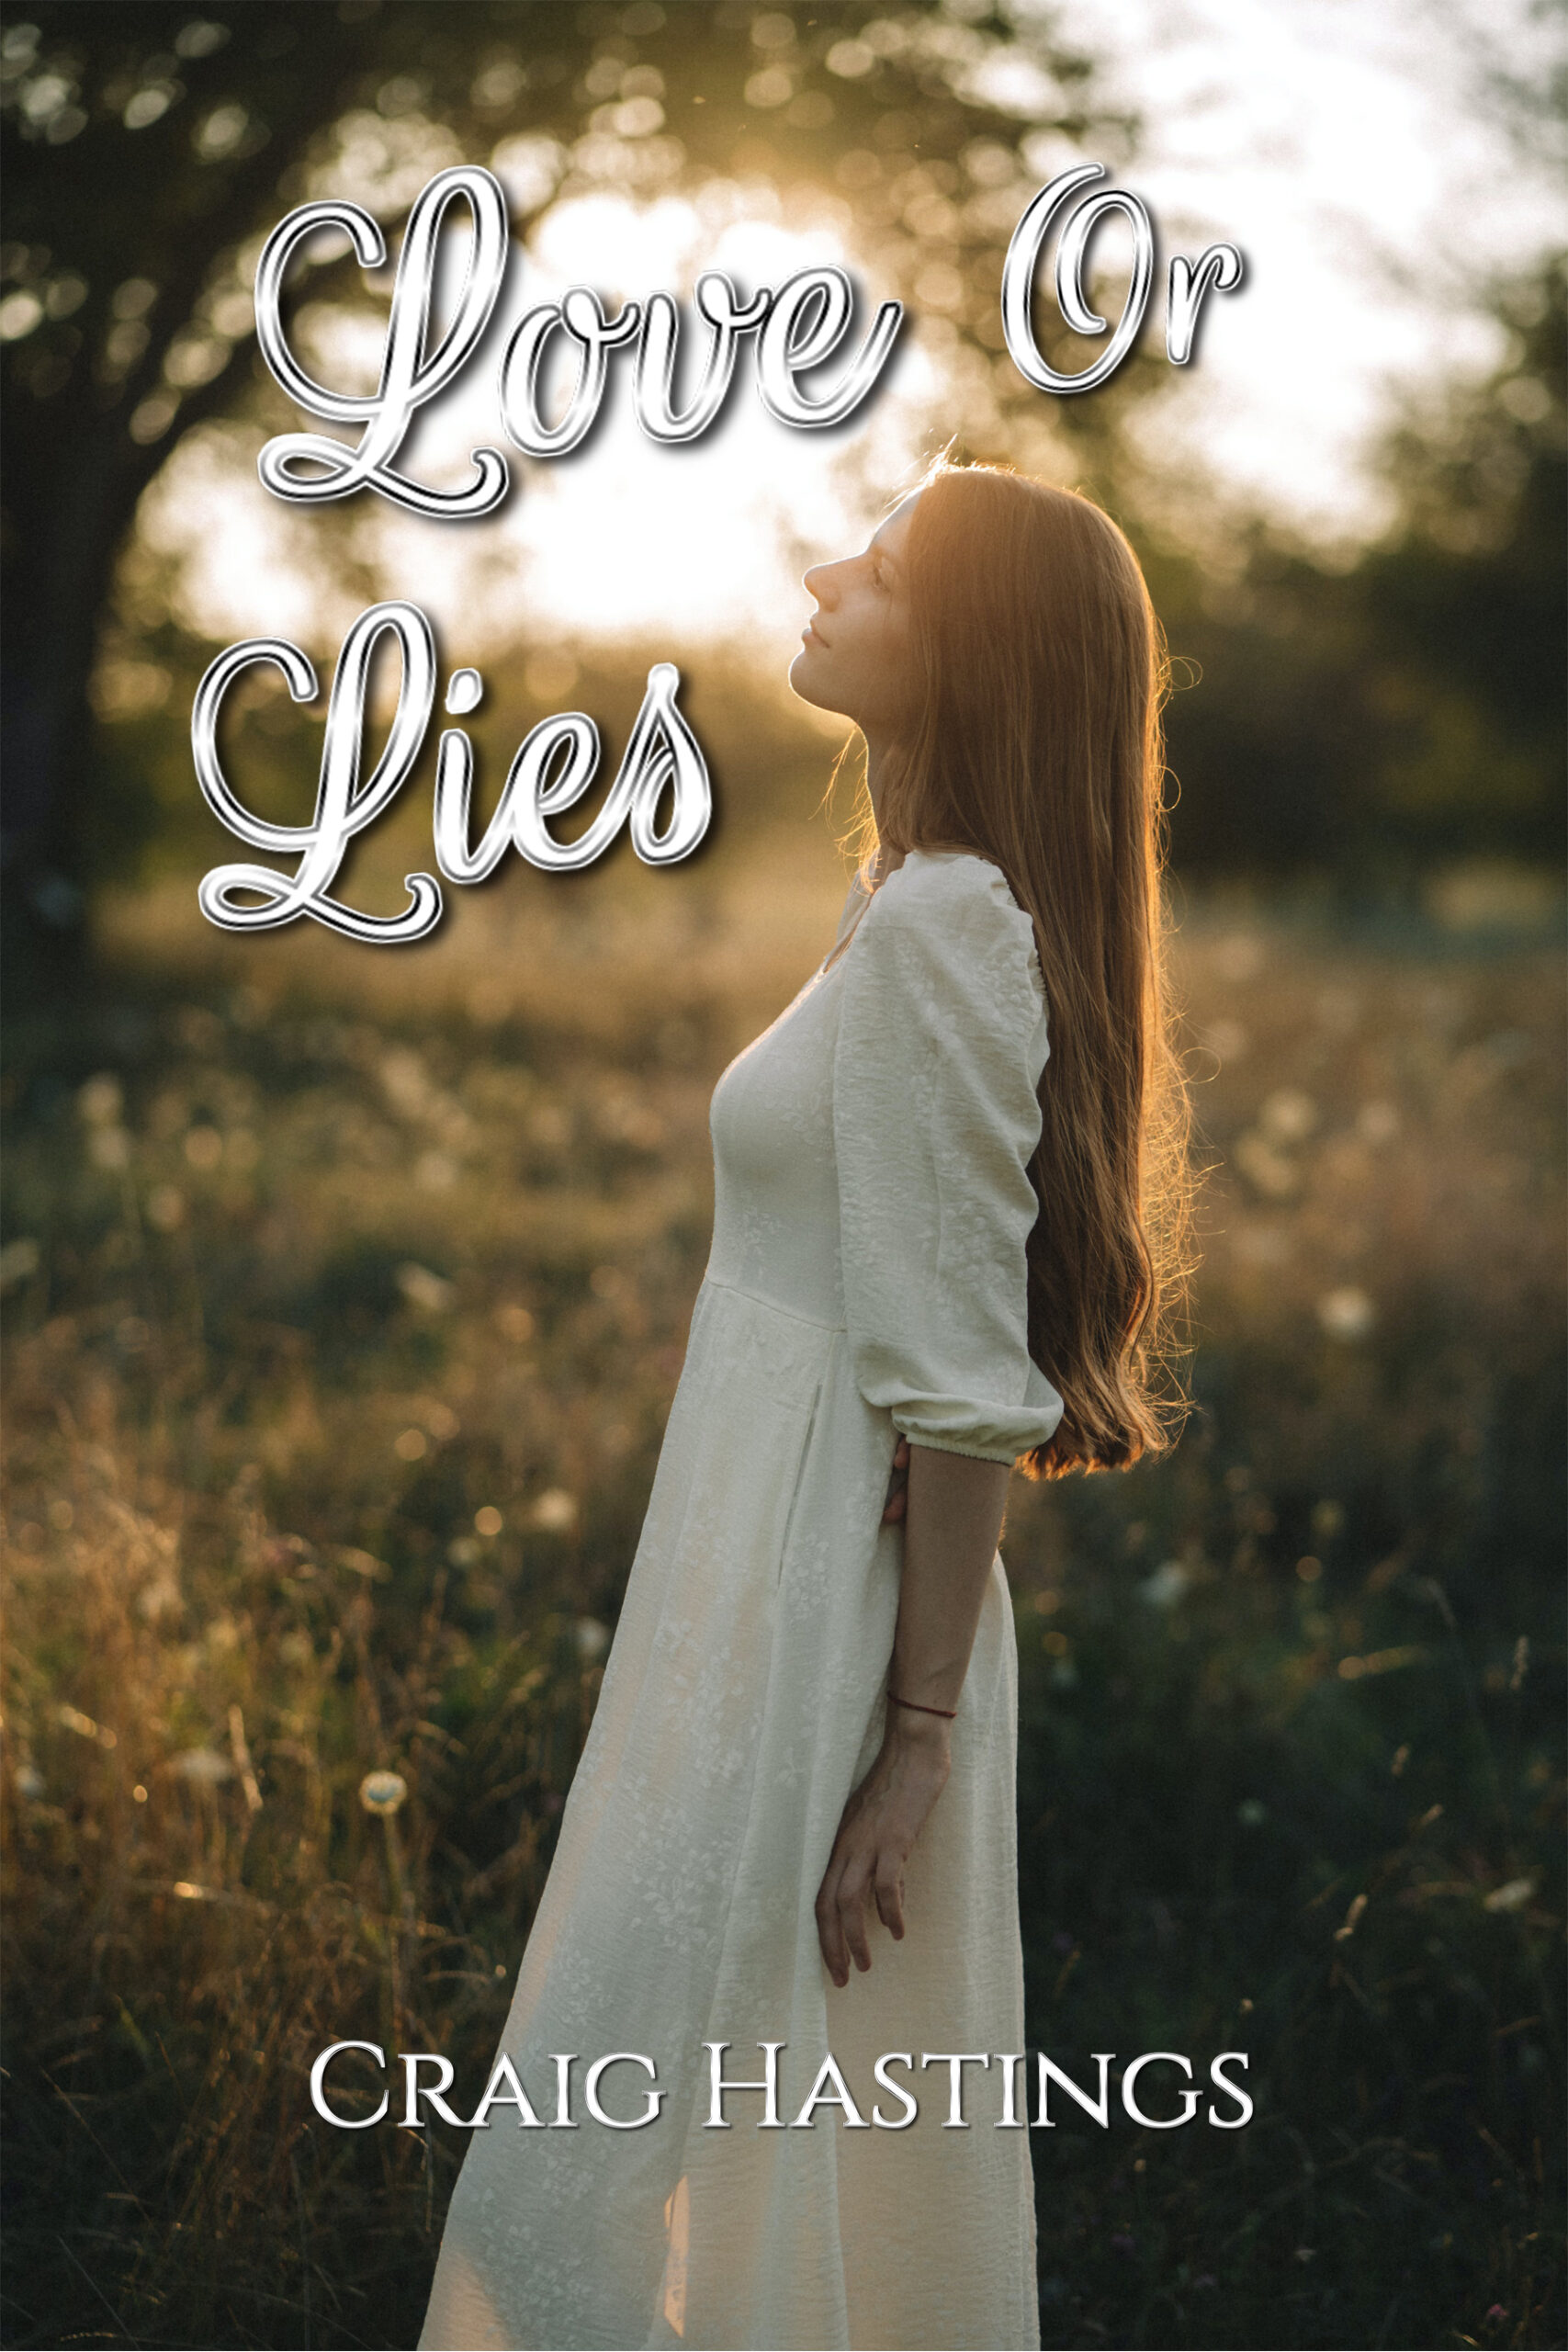 The front cover of Love or Lies by Craig Hastings